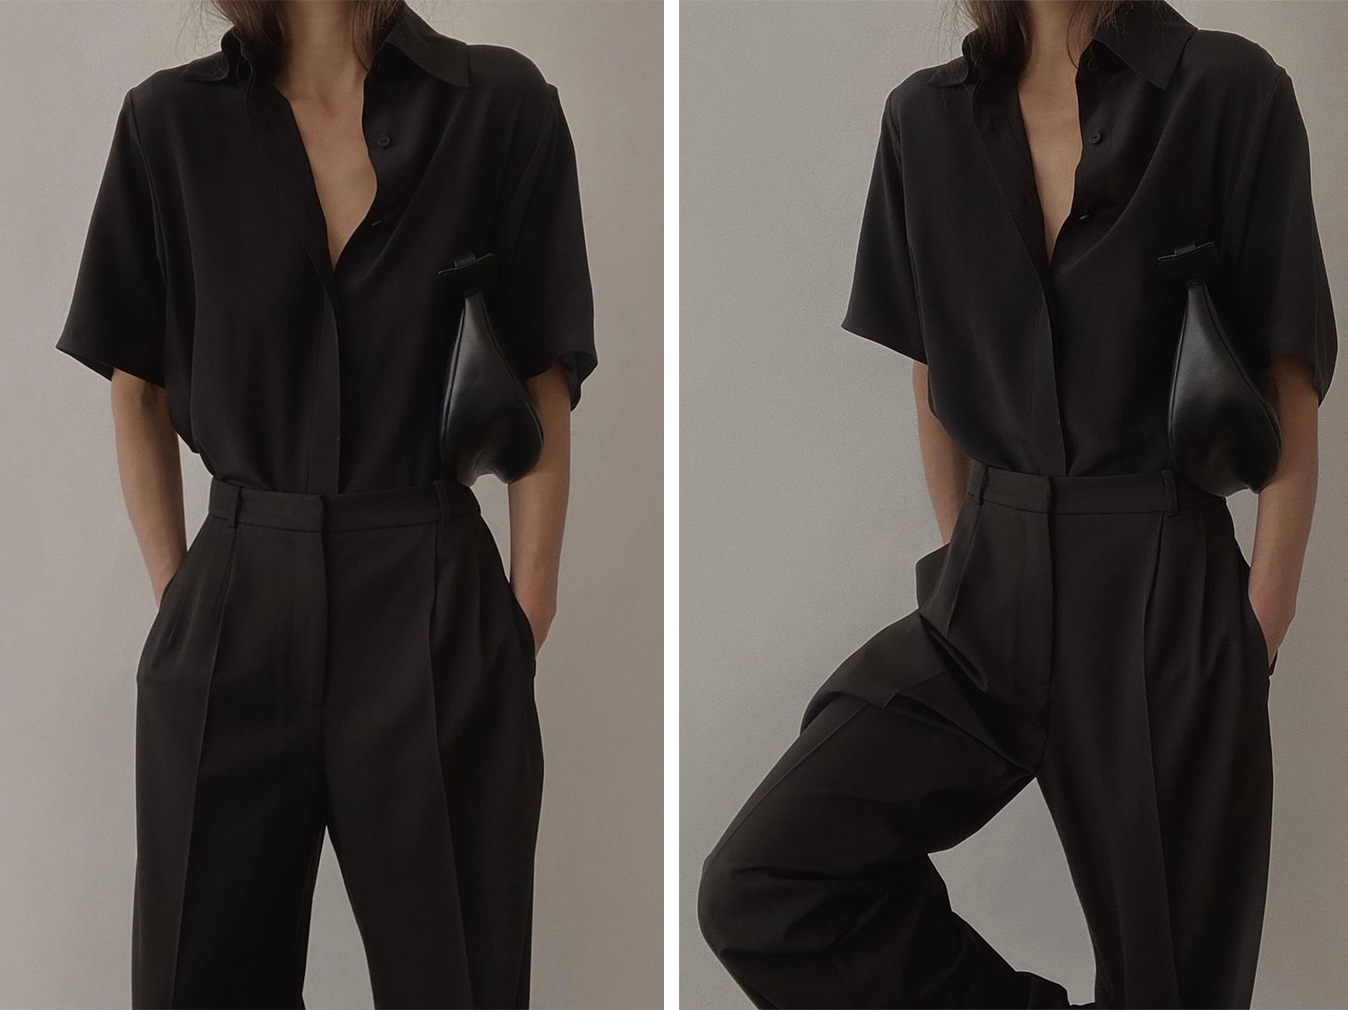 Black silk shirt and trousers